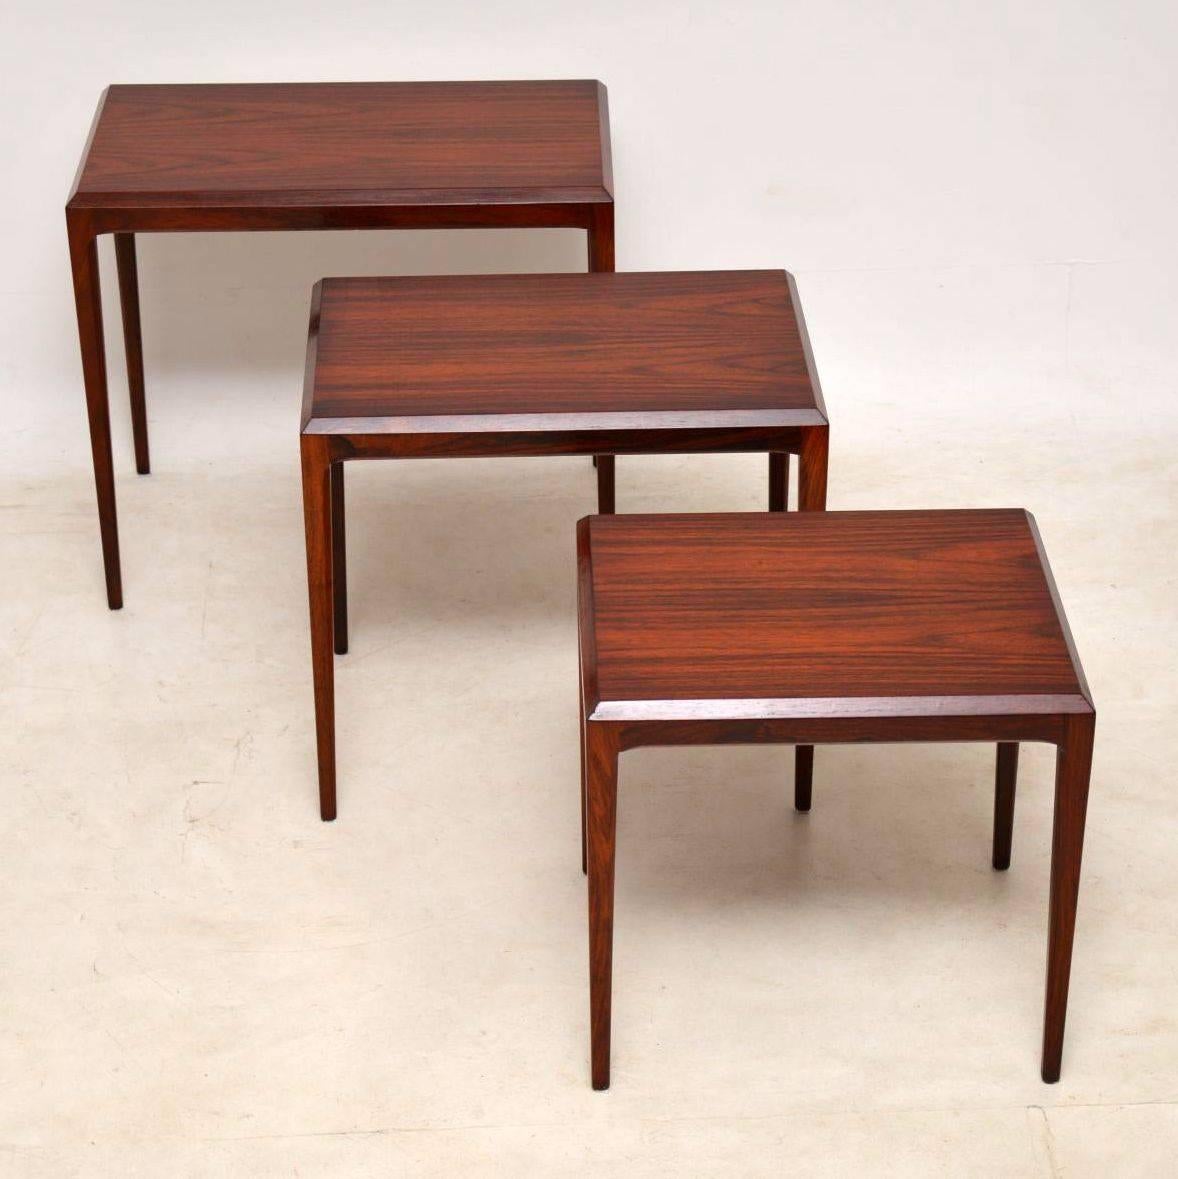 A superb nest of vintage tables, these were made in Denmark by CFC Silkeborg, they were designed by Johannes Andersen. They are in great condition for their age, with just some minor surface wear here and there. The middle table has some light